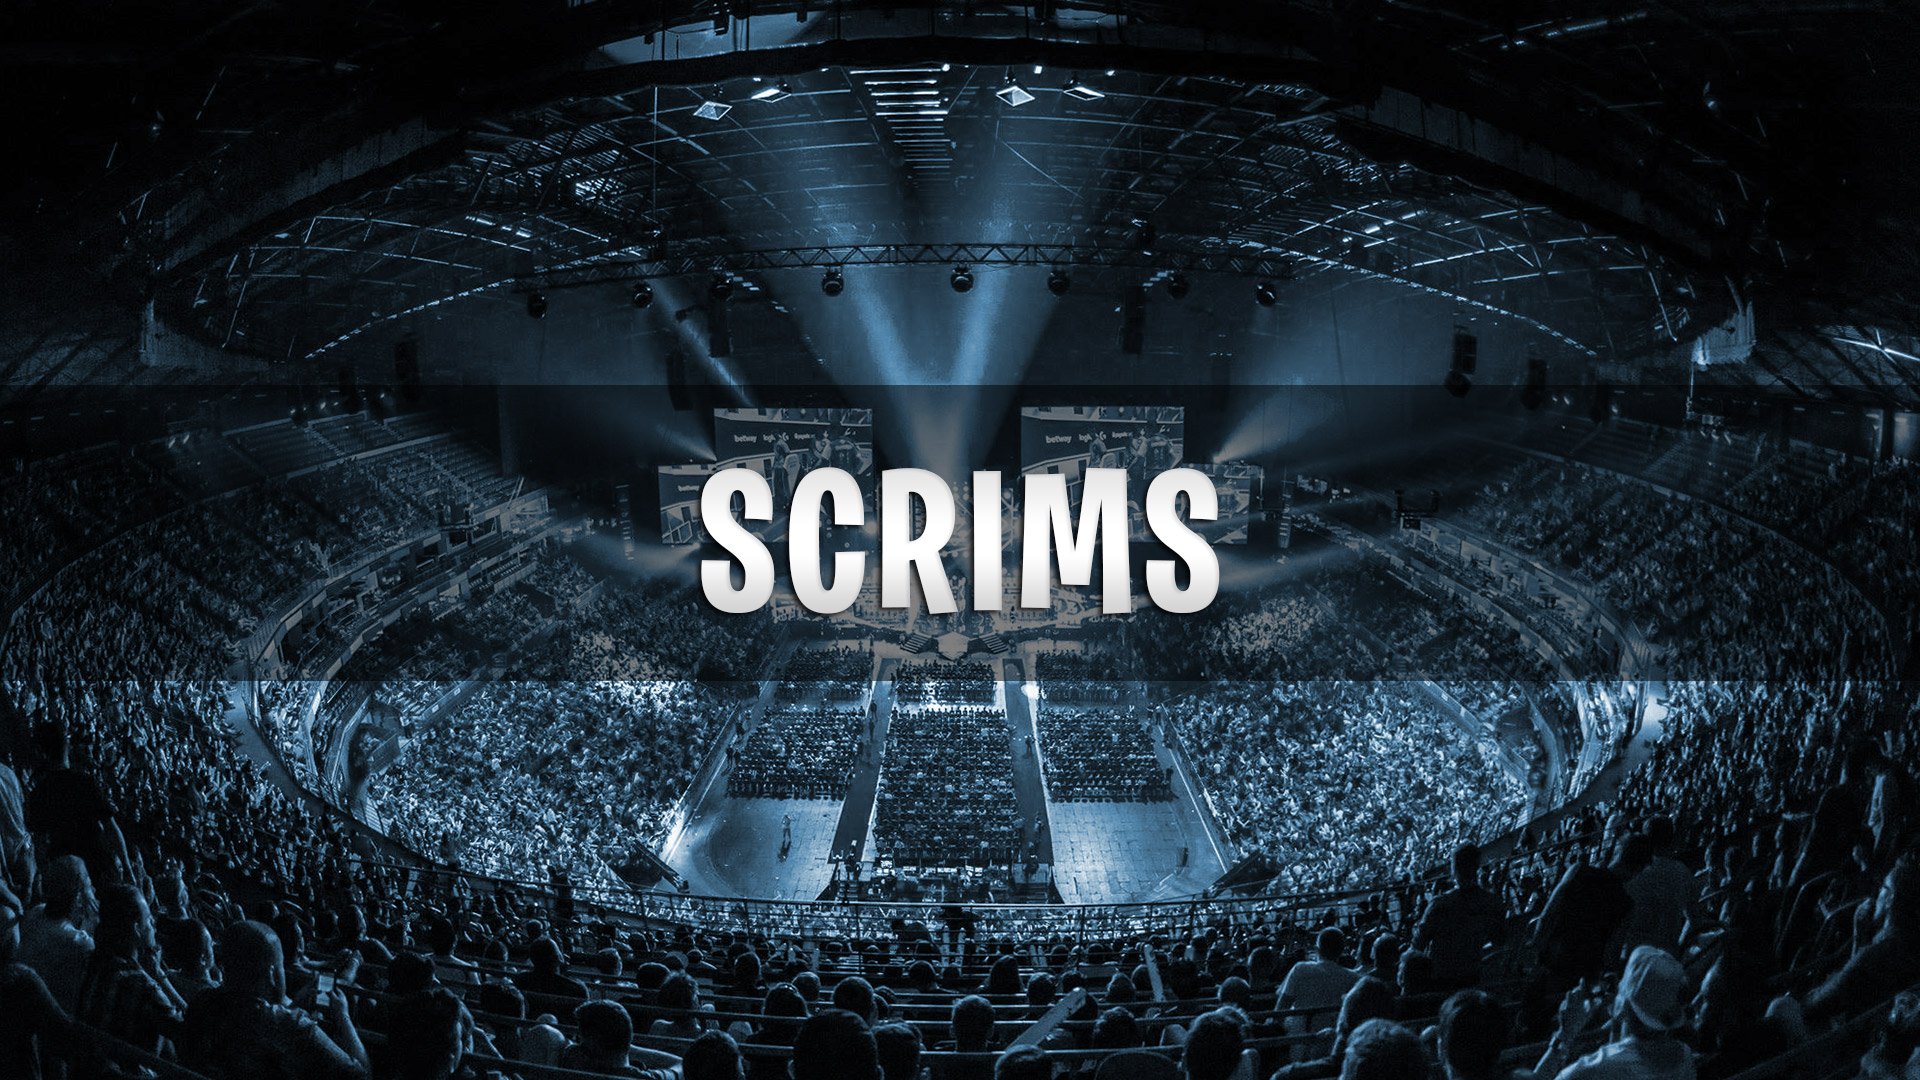 What are "scrims" in professional gaming?